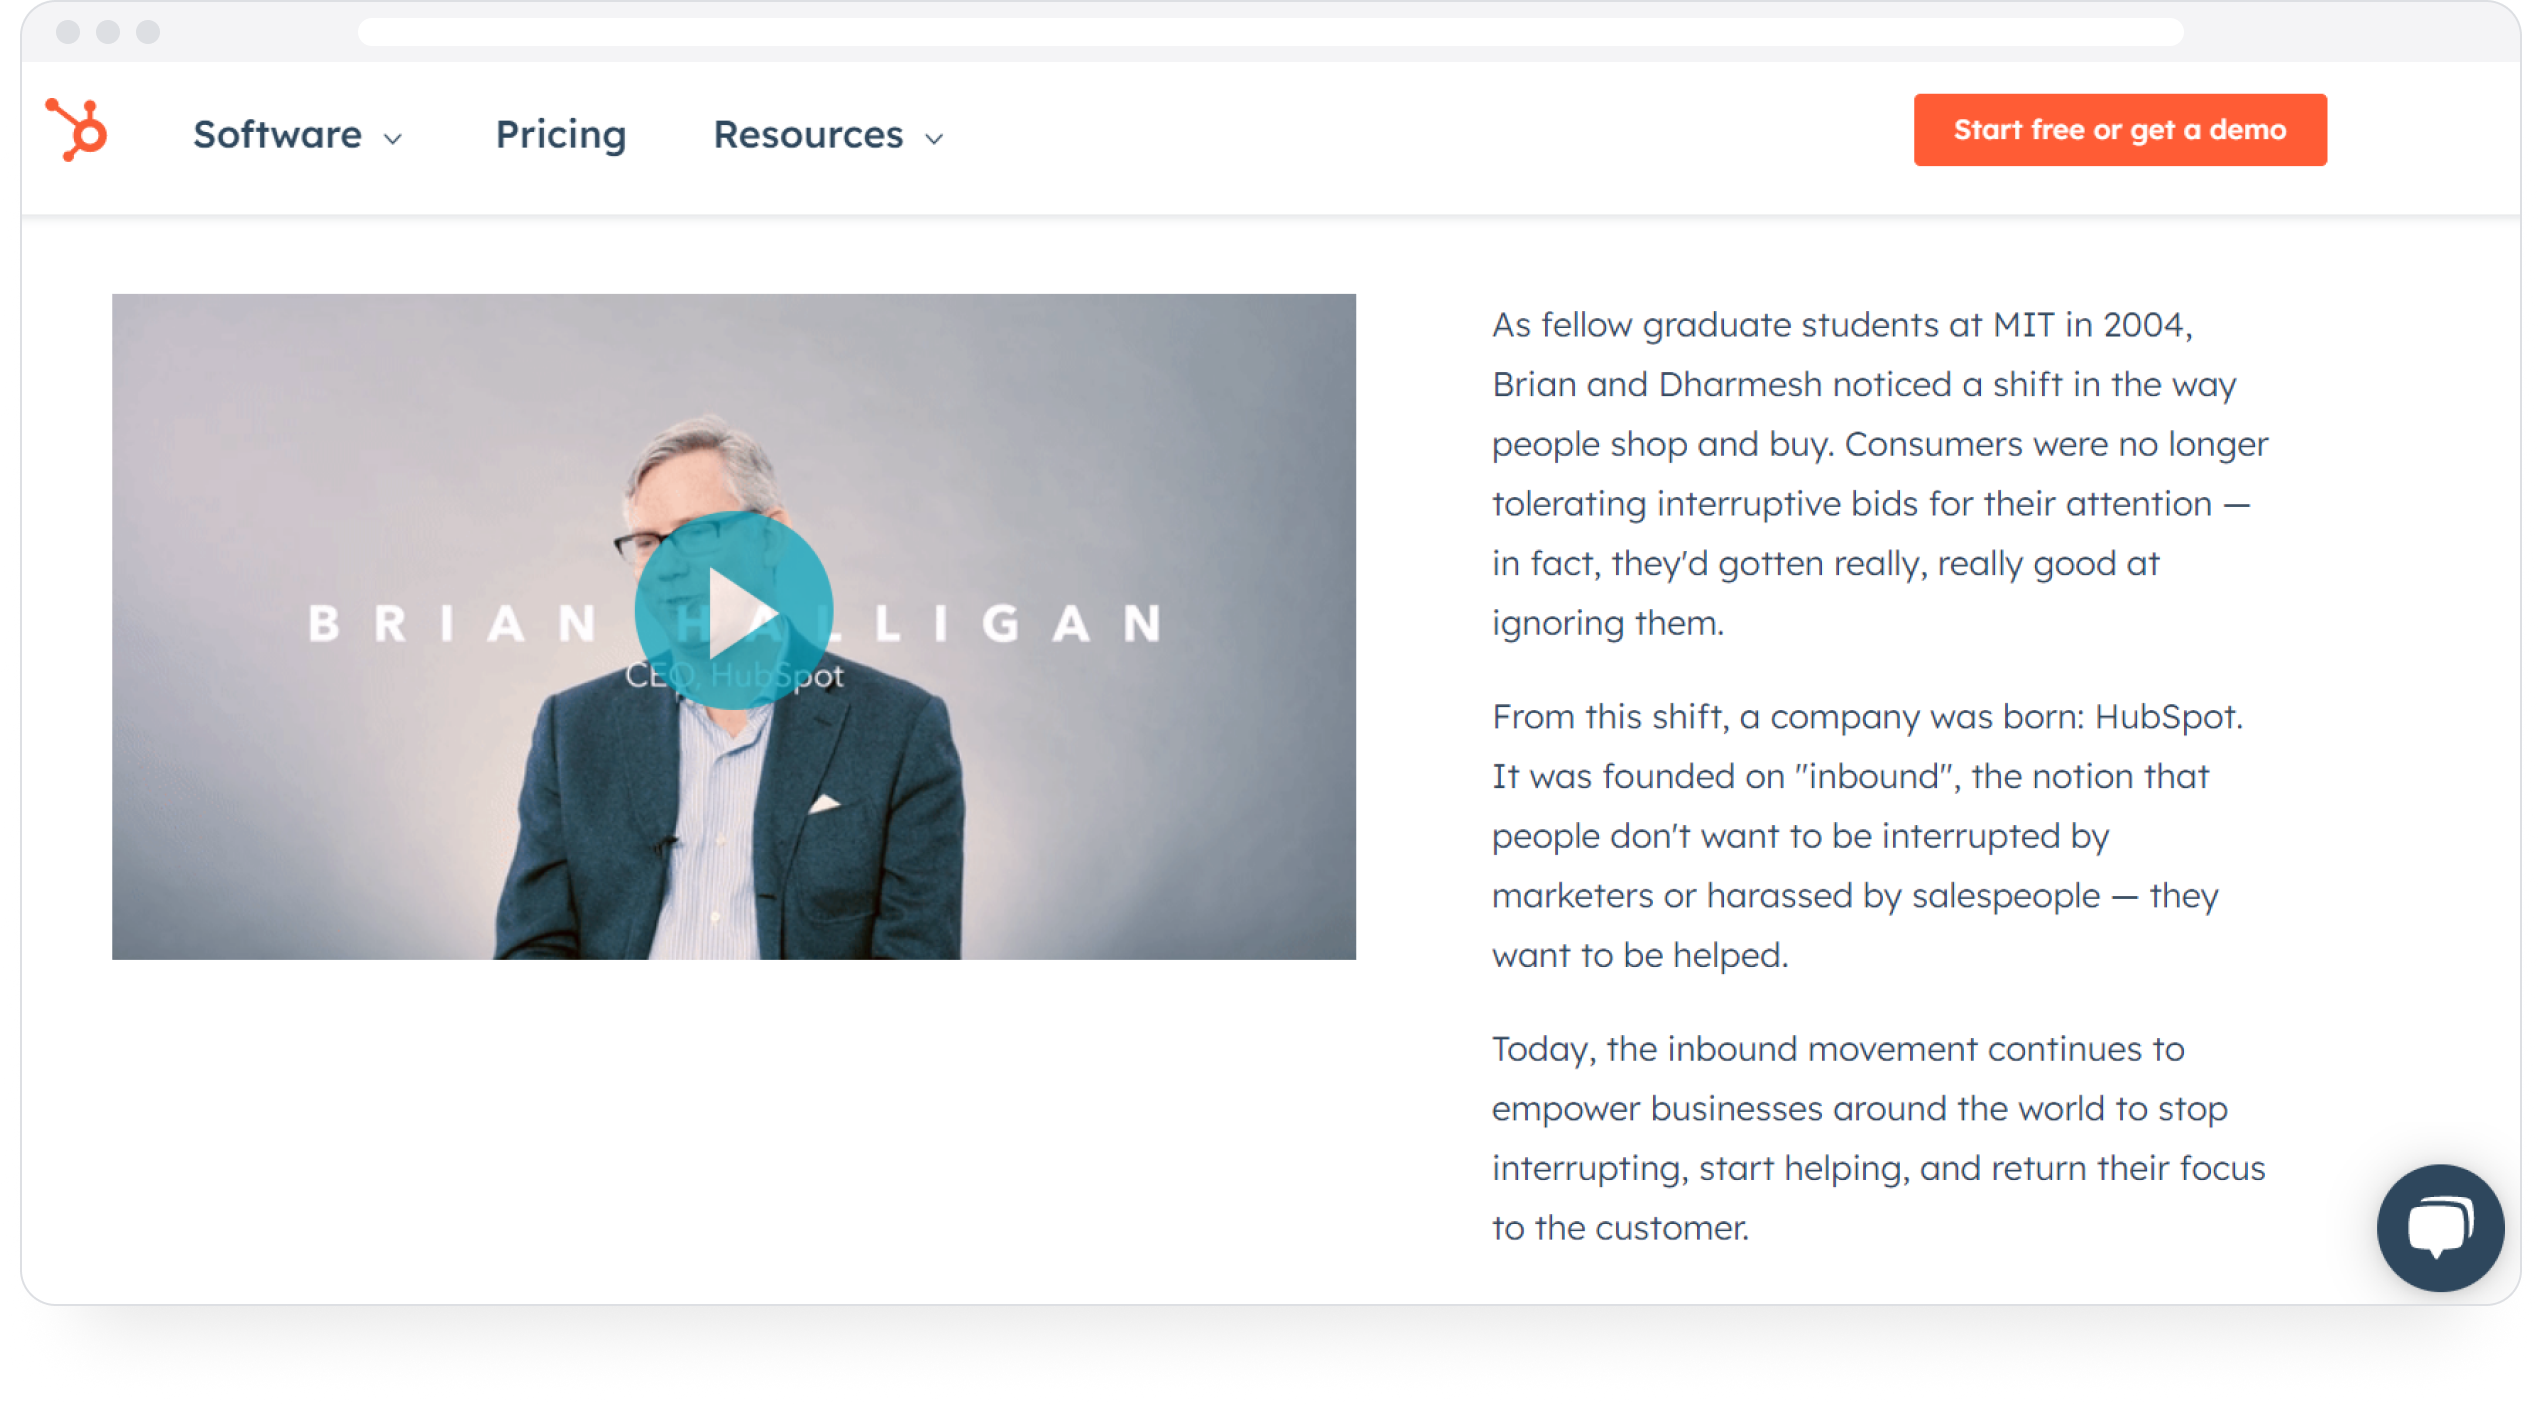 Hubspot's "About Me" section